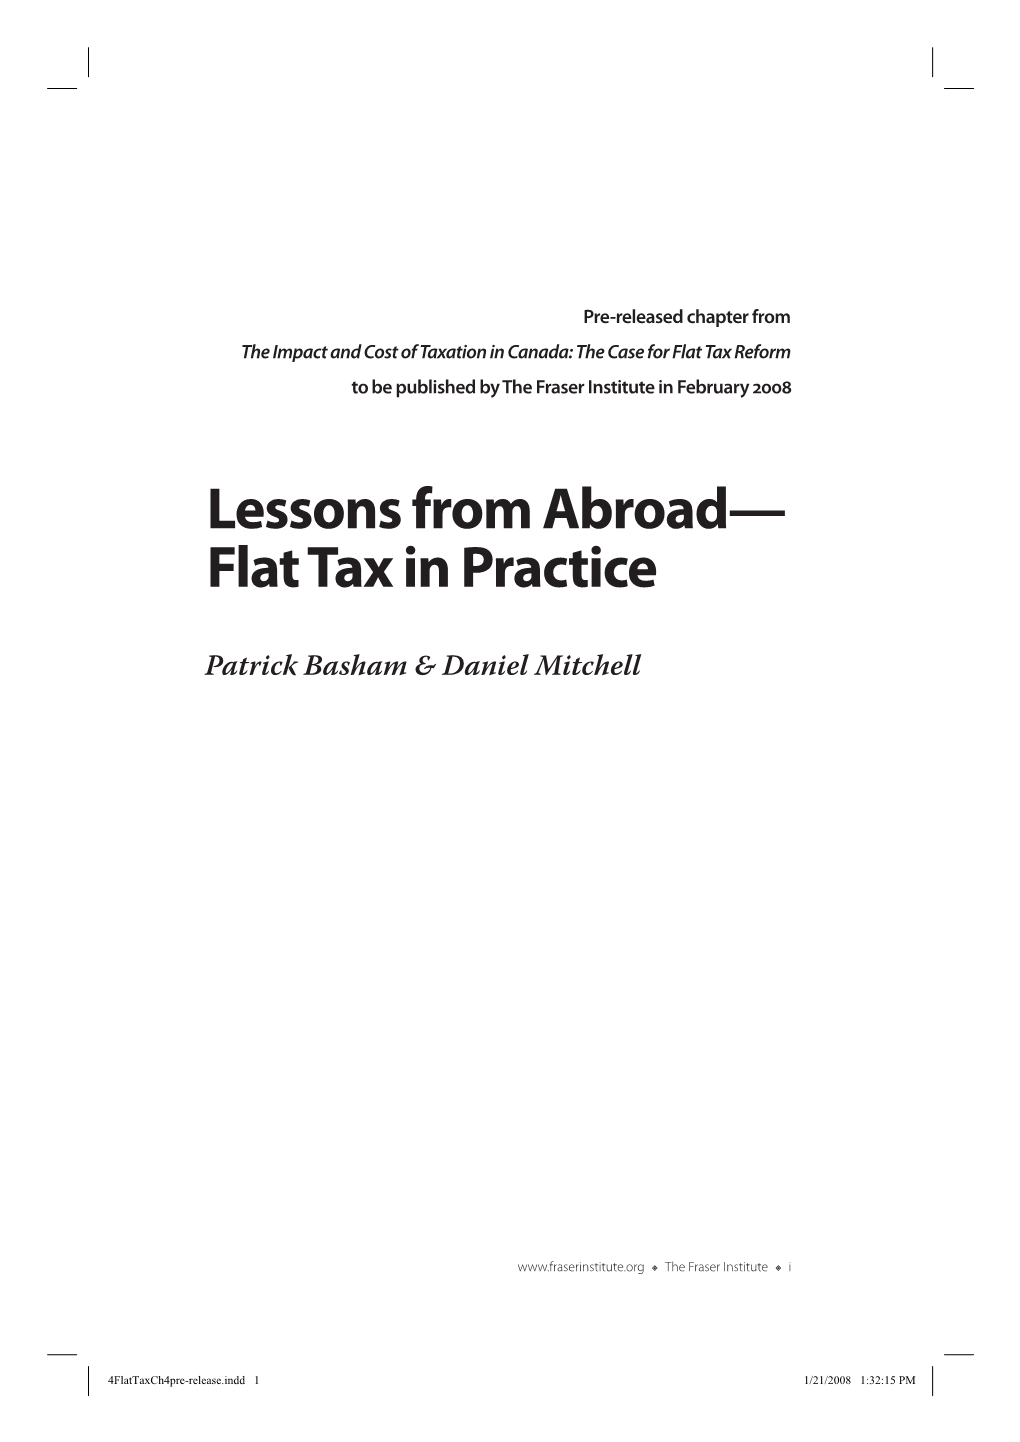 Lessons from Abroad—Flat Tax in Practice D 105 the Flat Tax in Practice